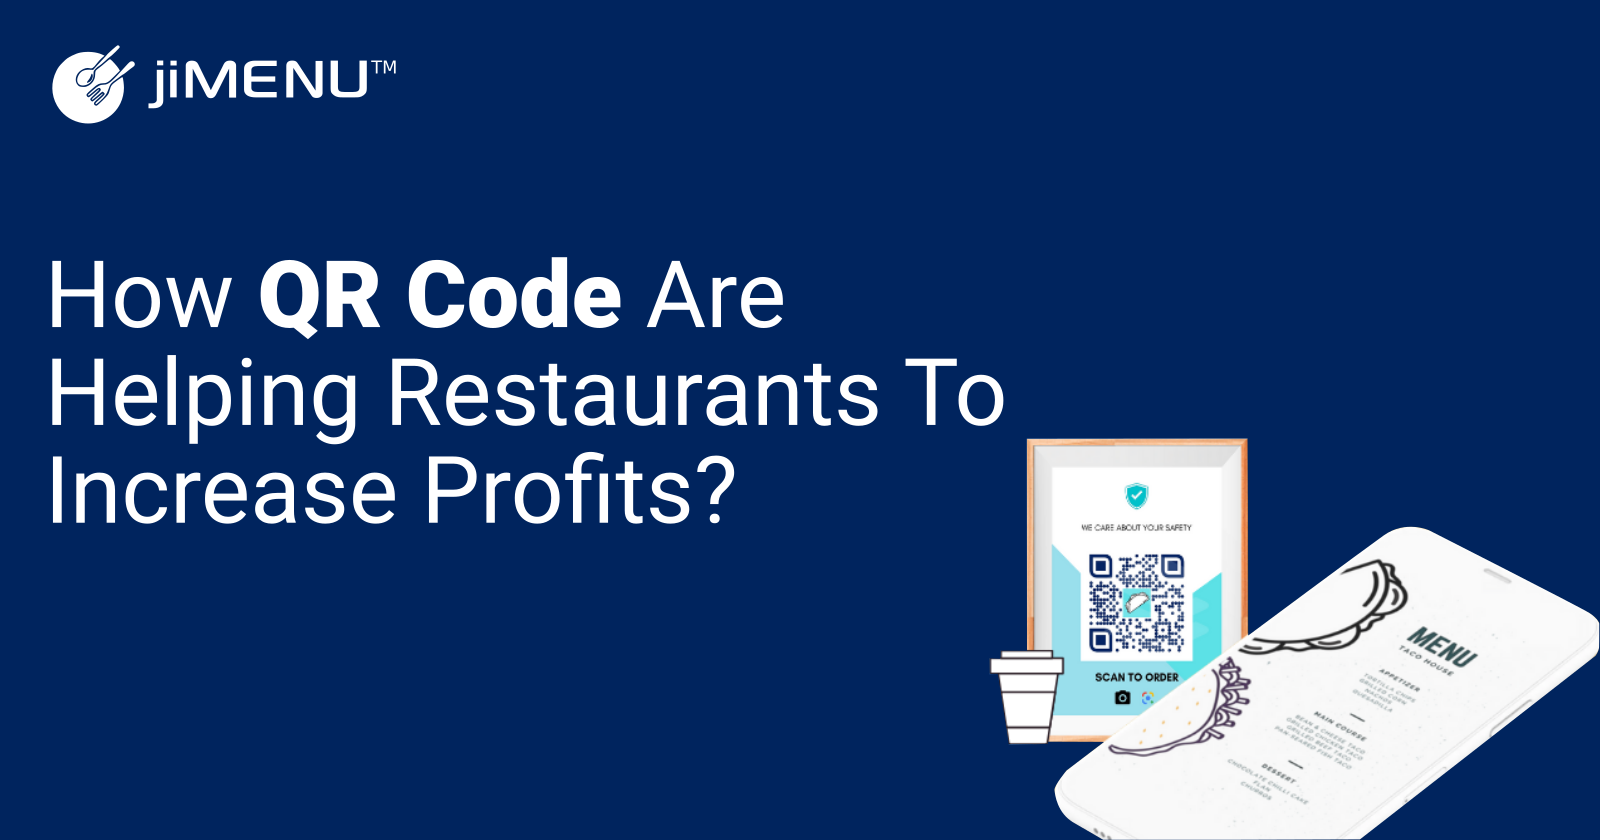 How QR Code Are Helping Restaurants to Increase Profits?